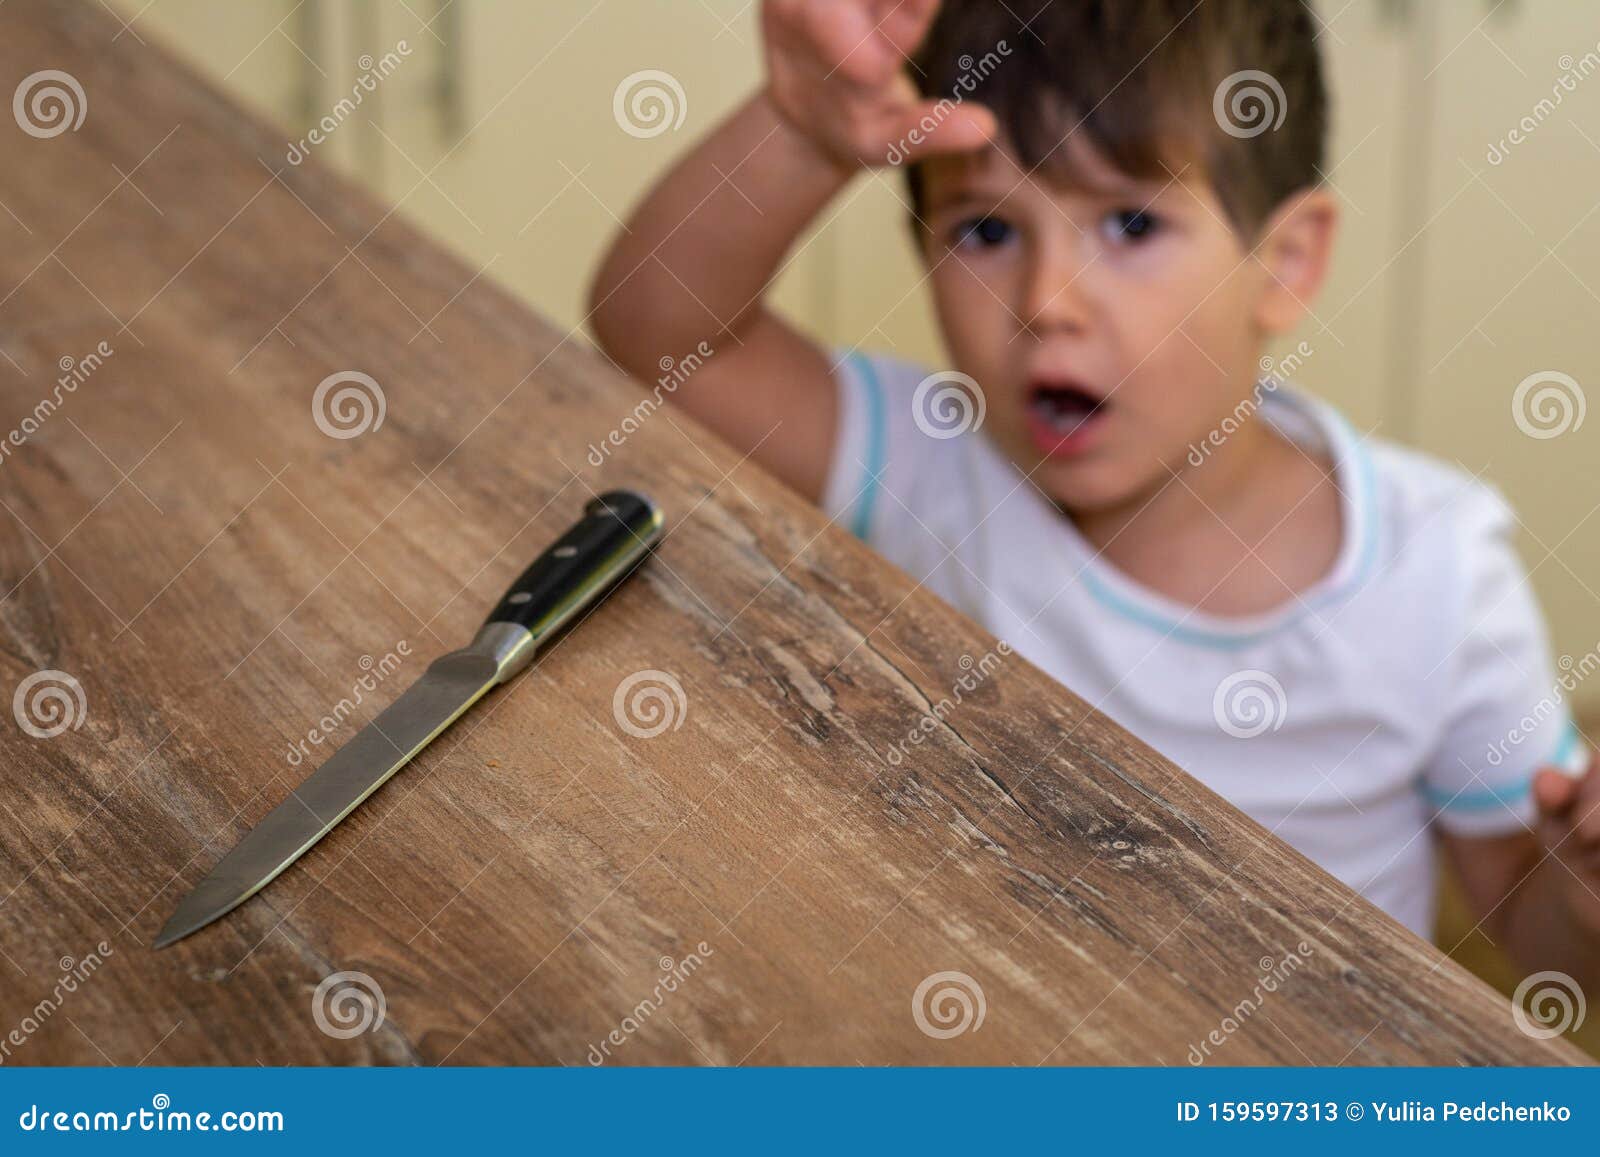 Child Little Boy Playing Dangerous Game With A Kitchen Knife Cut